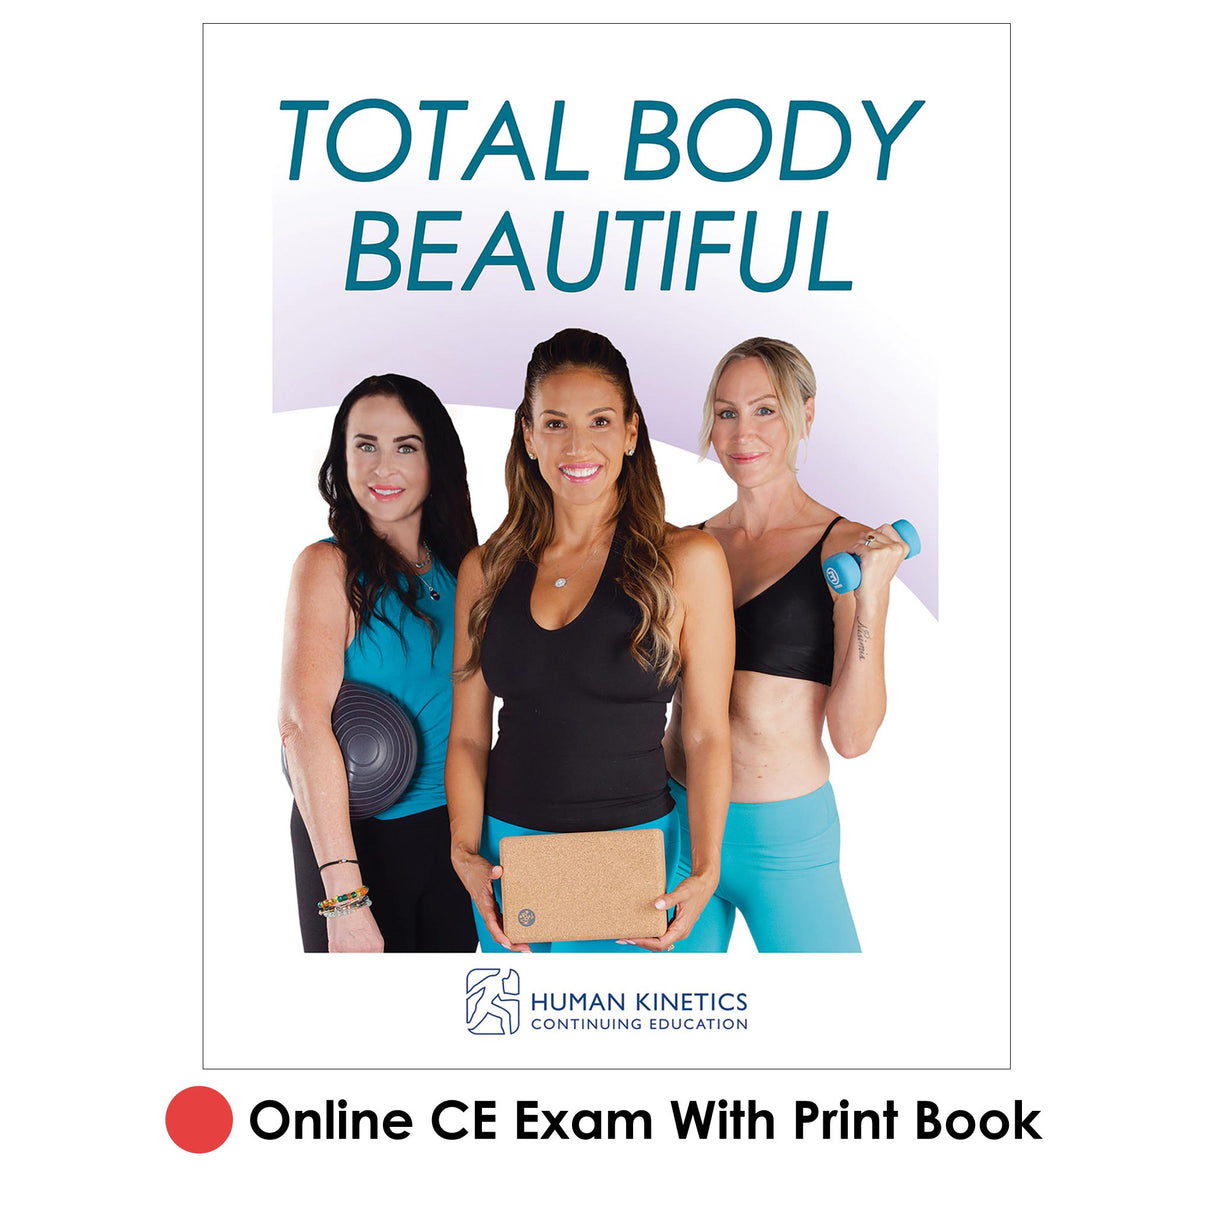 Total Body Beautiful Online CE Exam With Print Book